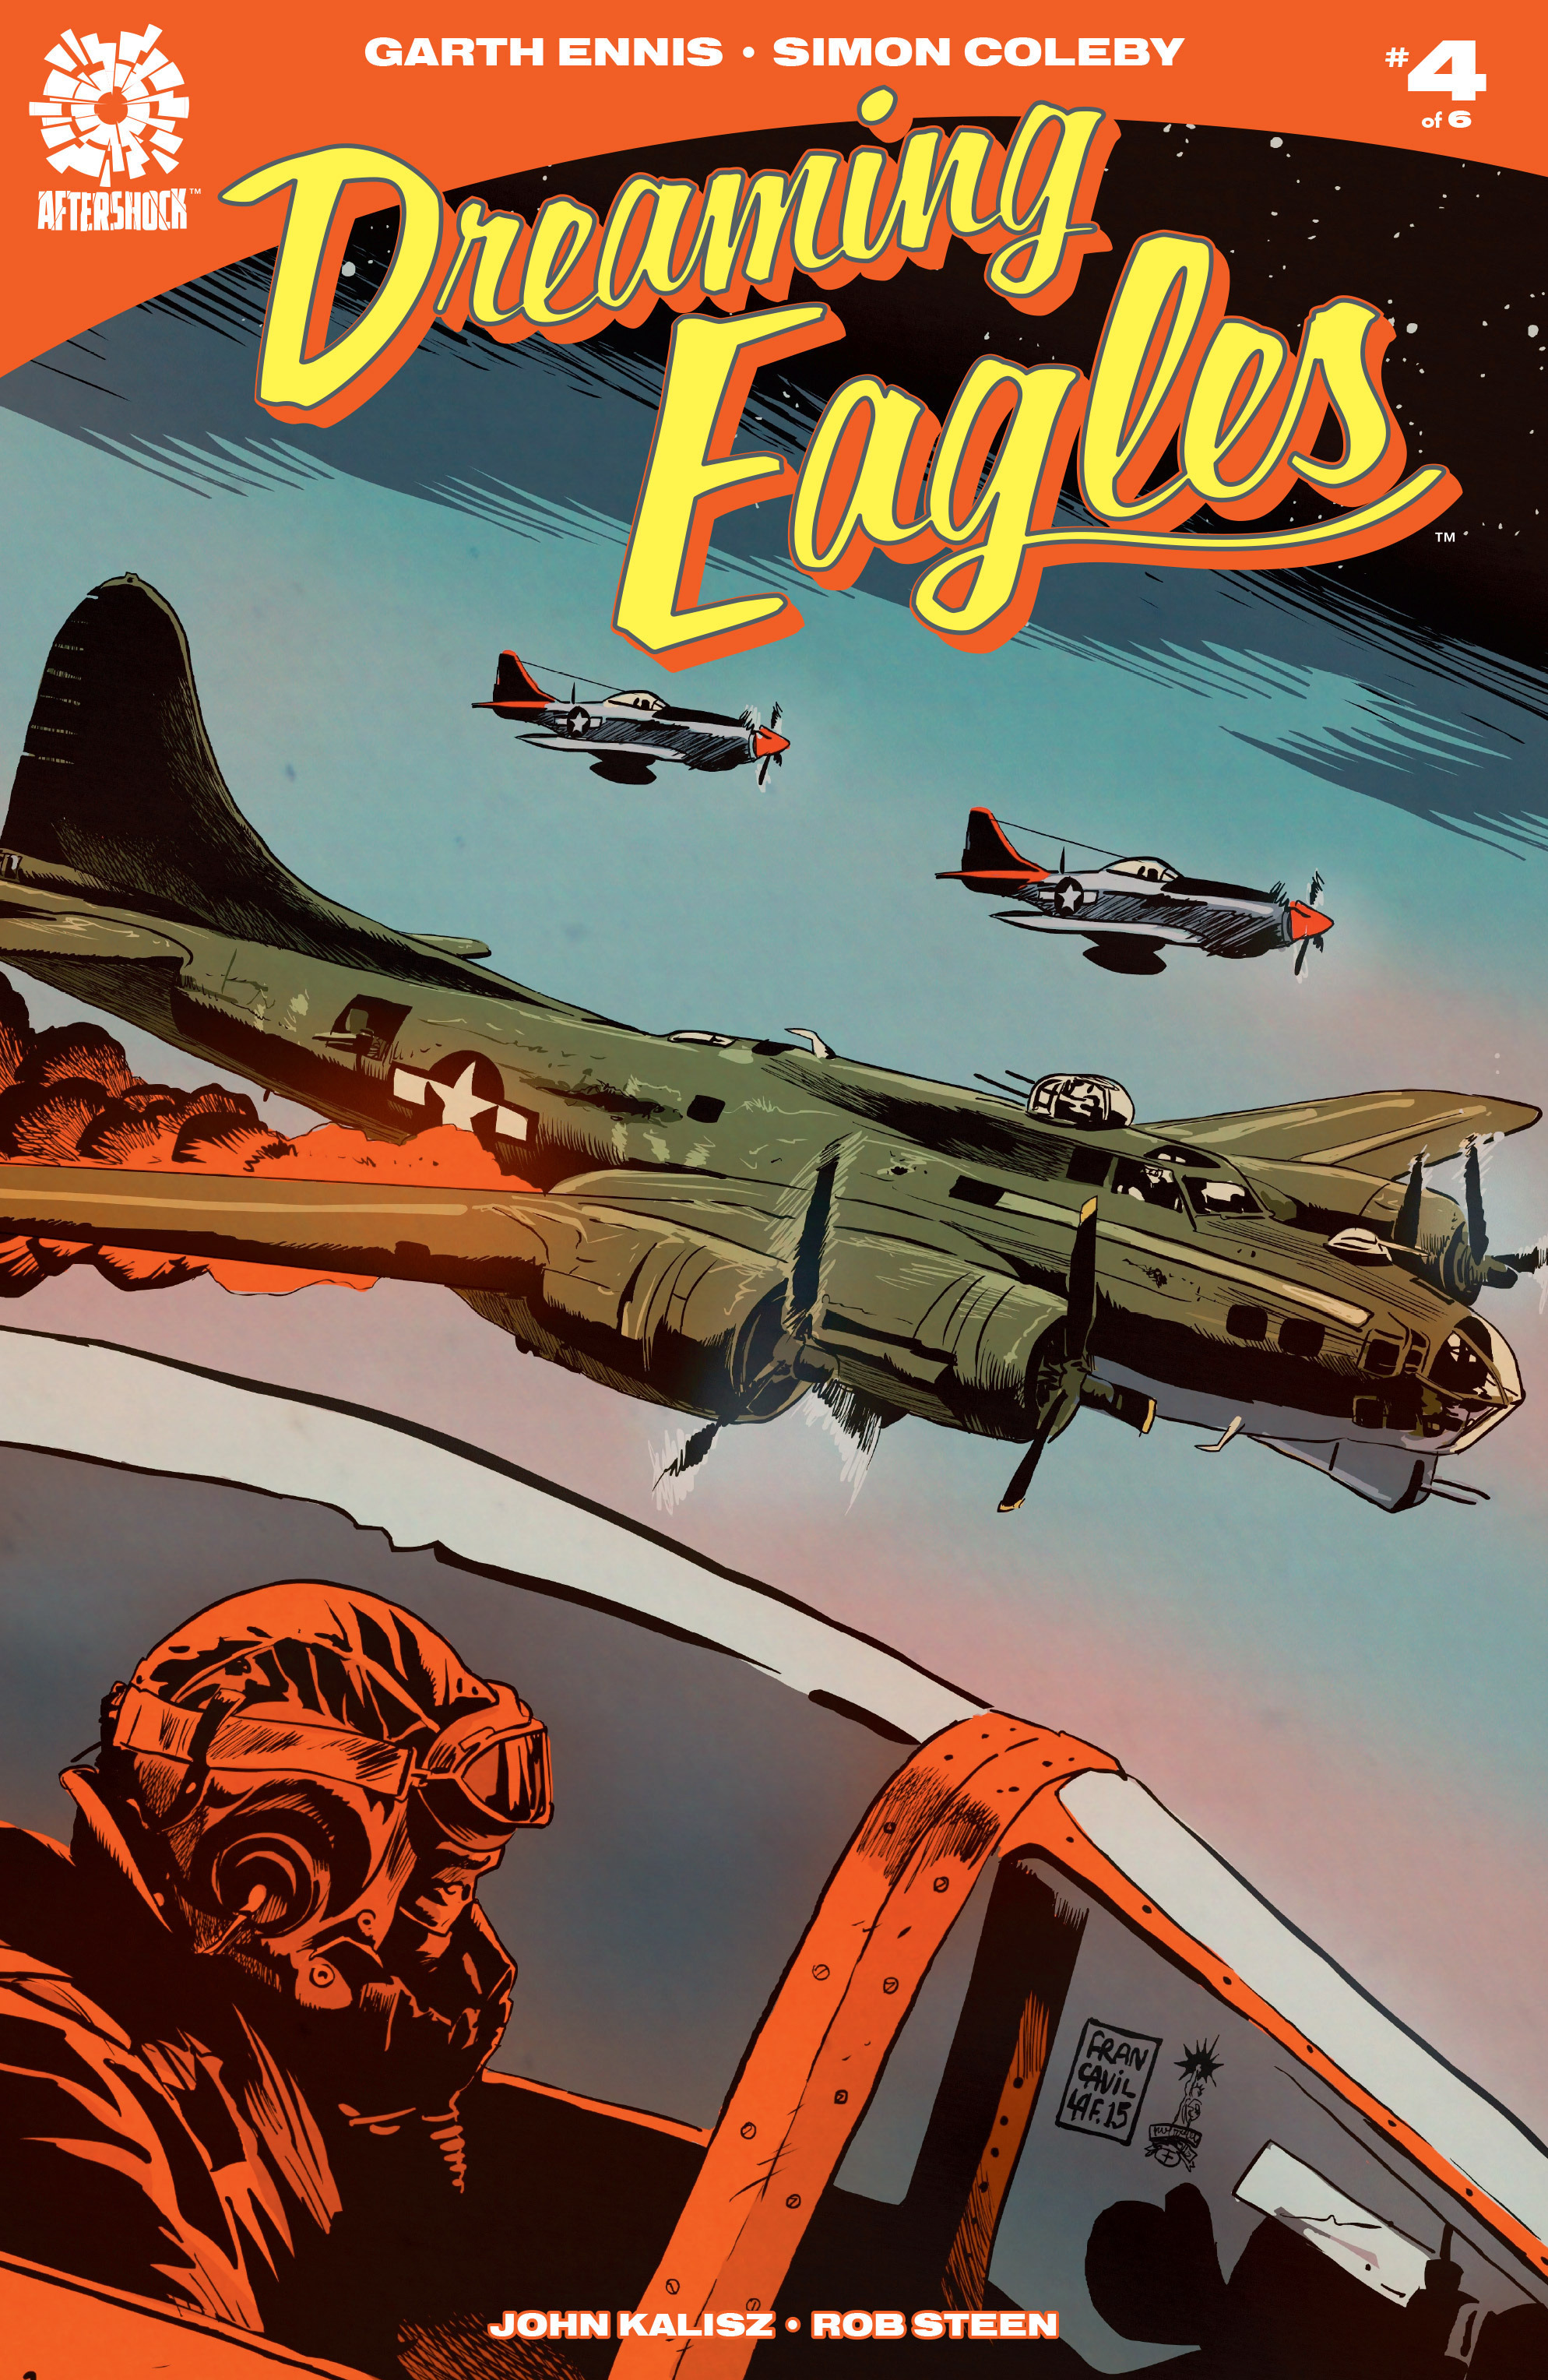 Read online Dreaming Eagles comic -  Issue #4 - 1